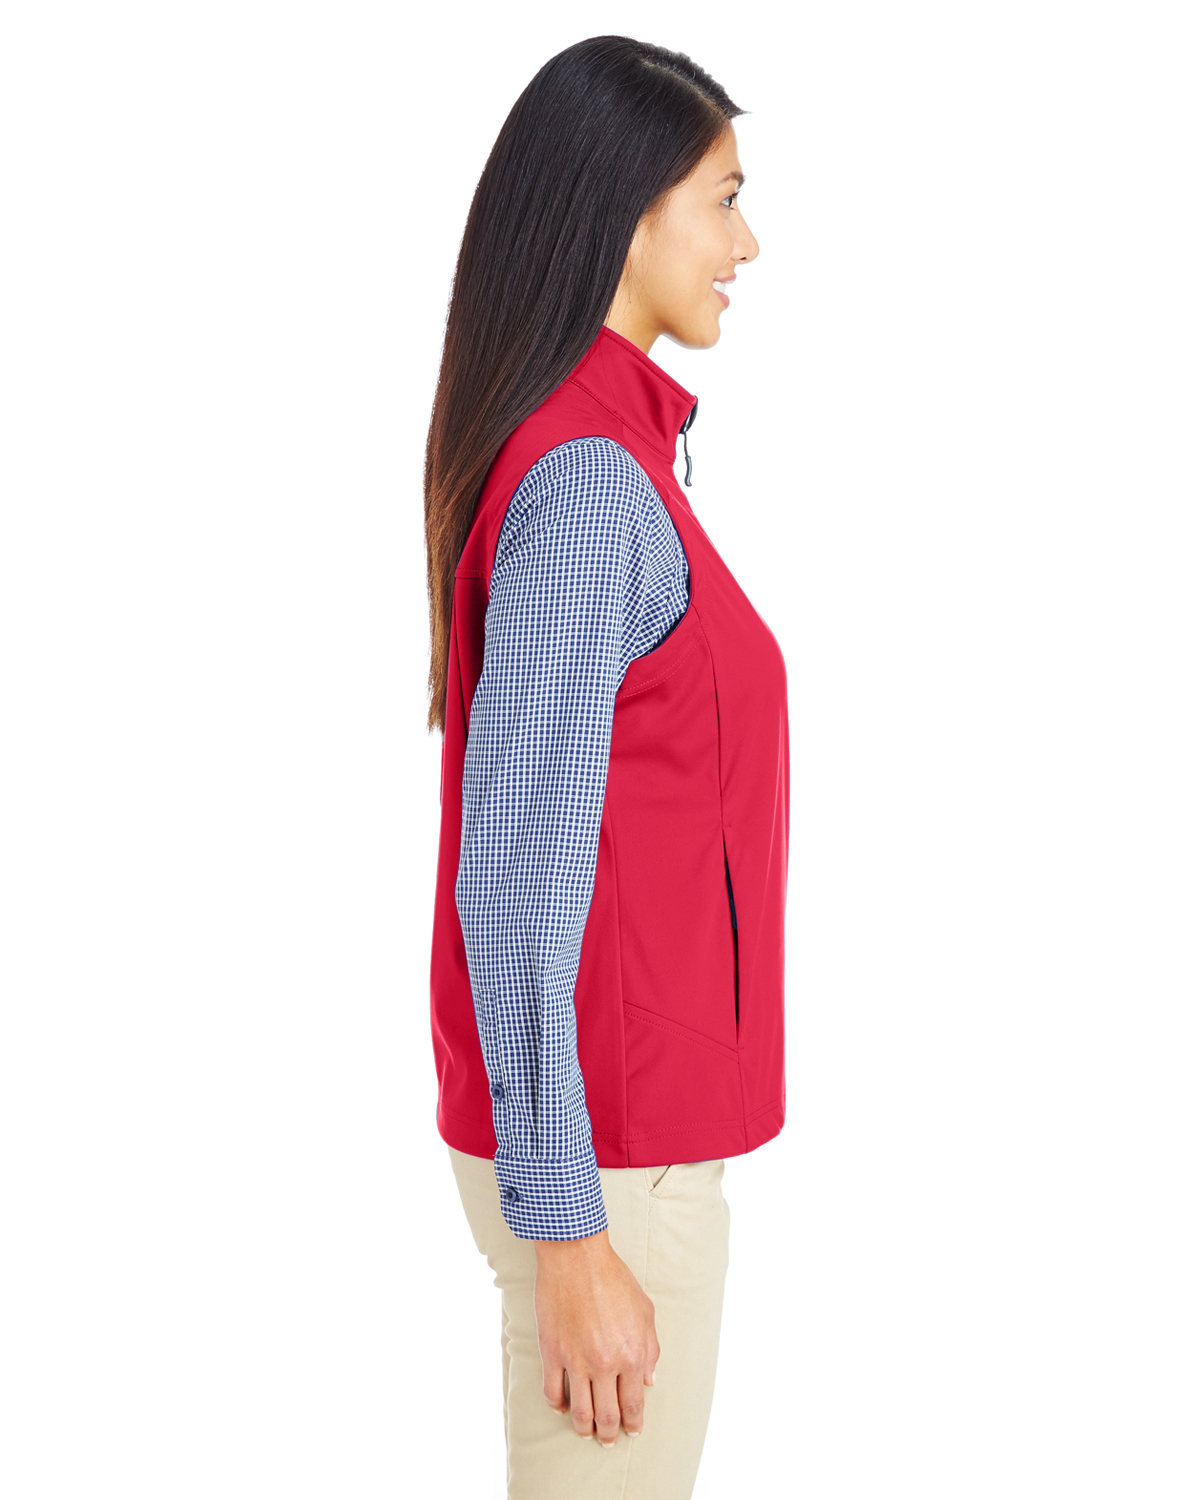 Ladies' Techno Lite Three-Layer Knit Tech-Shell Quarter-Zip Vest - CLASSIC RED - S - image 3 of 3